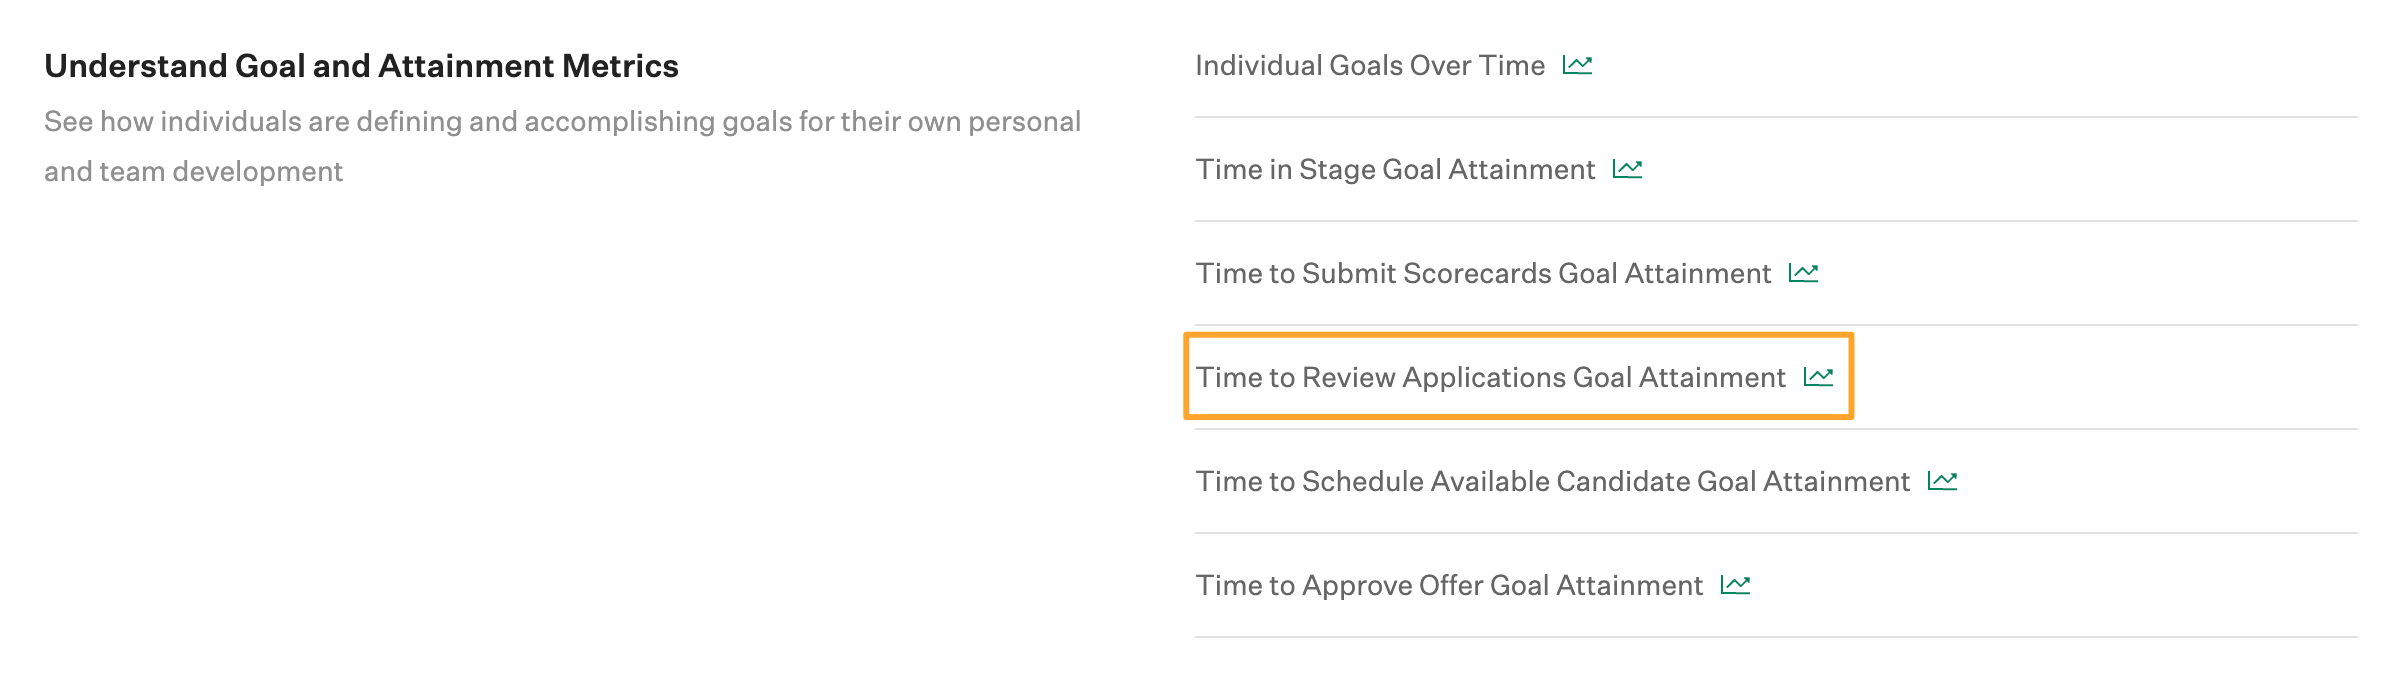 Time-to-review-applications-report-highlighted-on-essential-reports-page.png